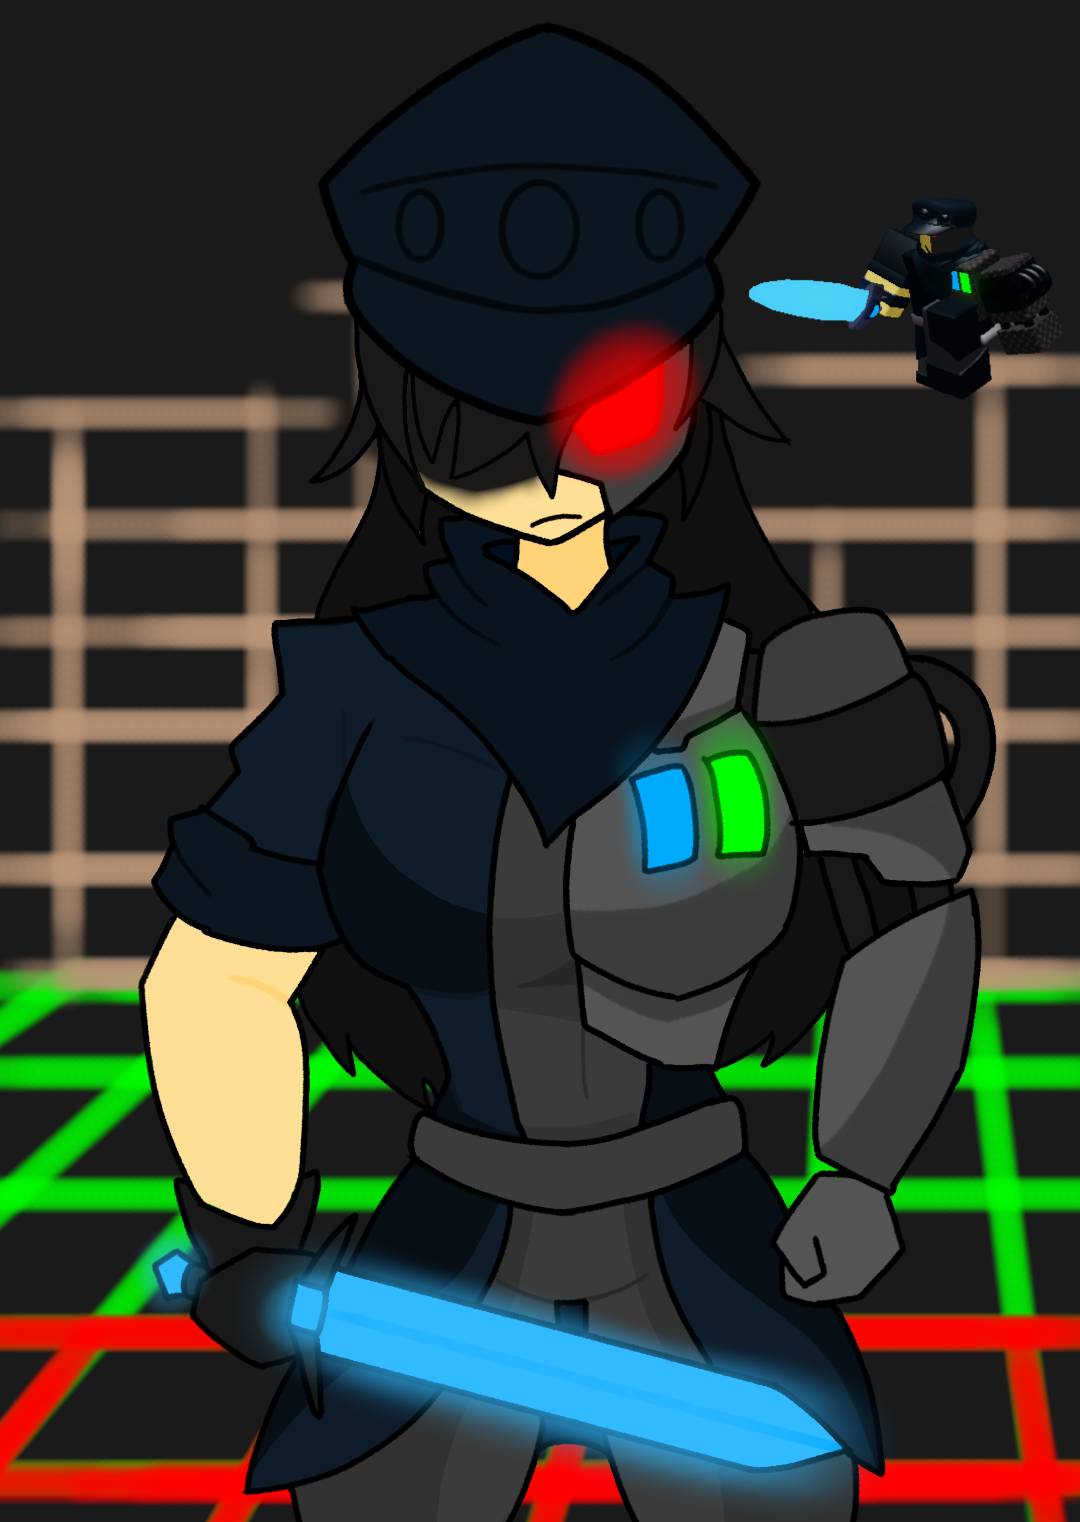 R63 roblox art thing because yes by TomSoldTord on Newgrounds